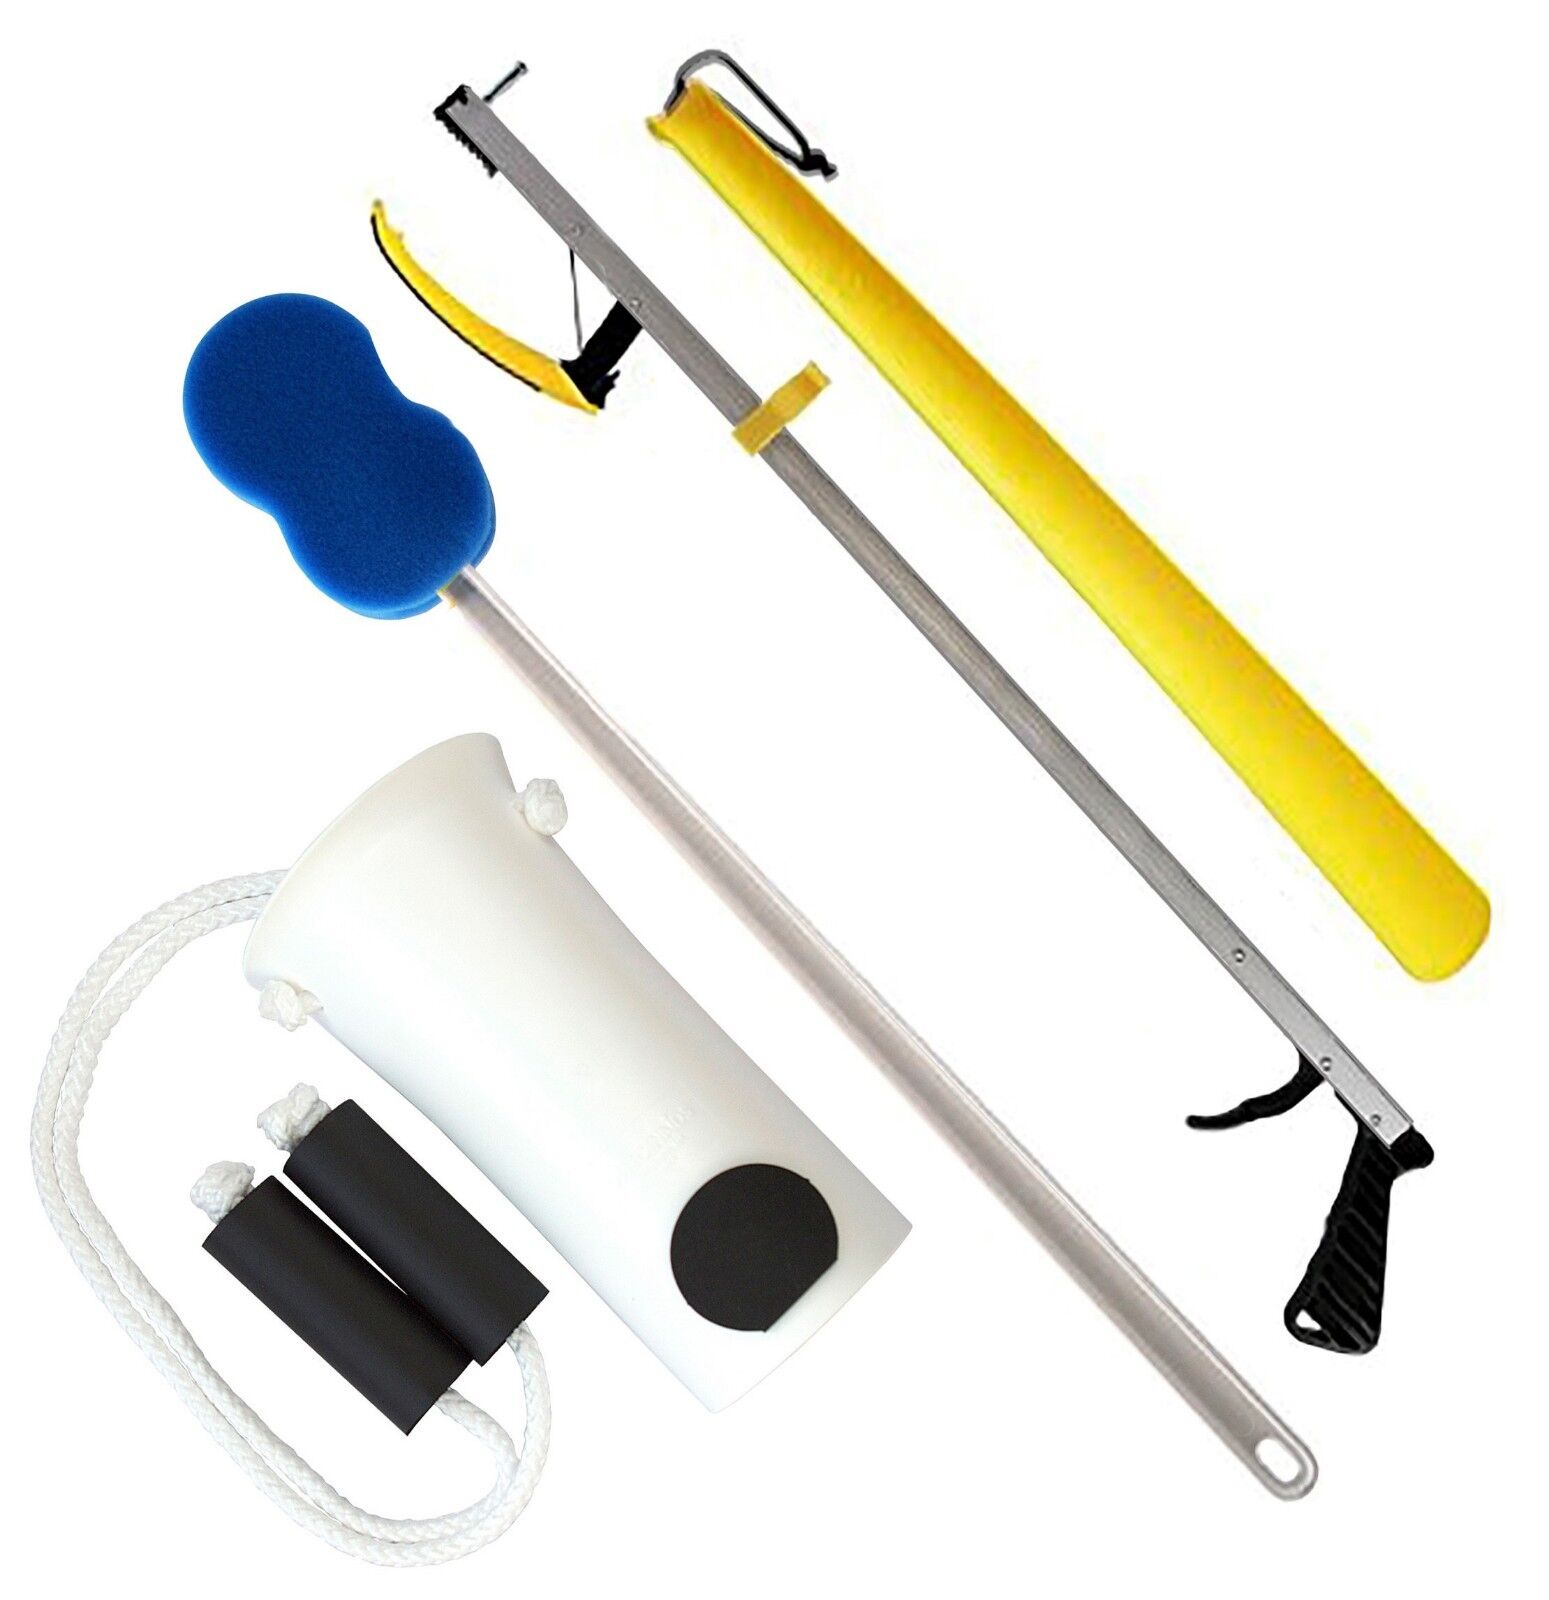 RMS Deluxe Hip Kit, Knee Replacement Kit, (32 or 26 inches Reacher)